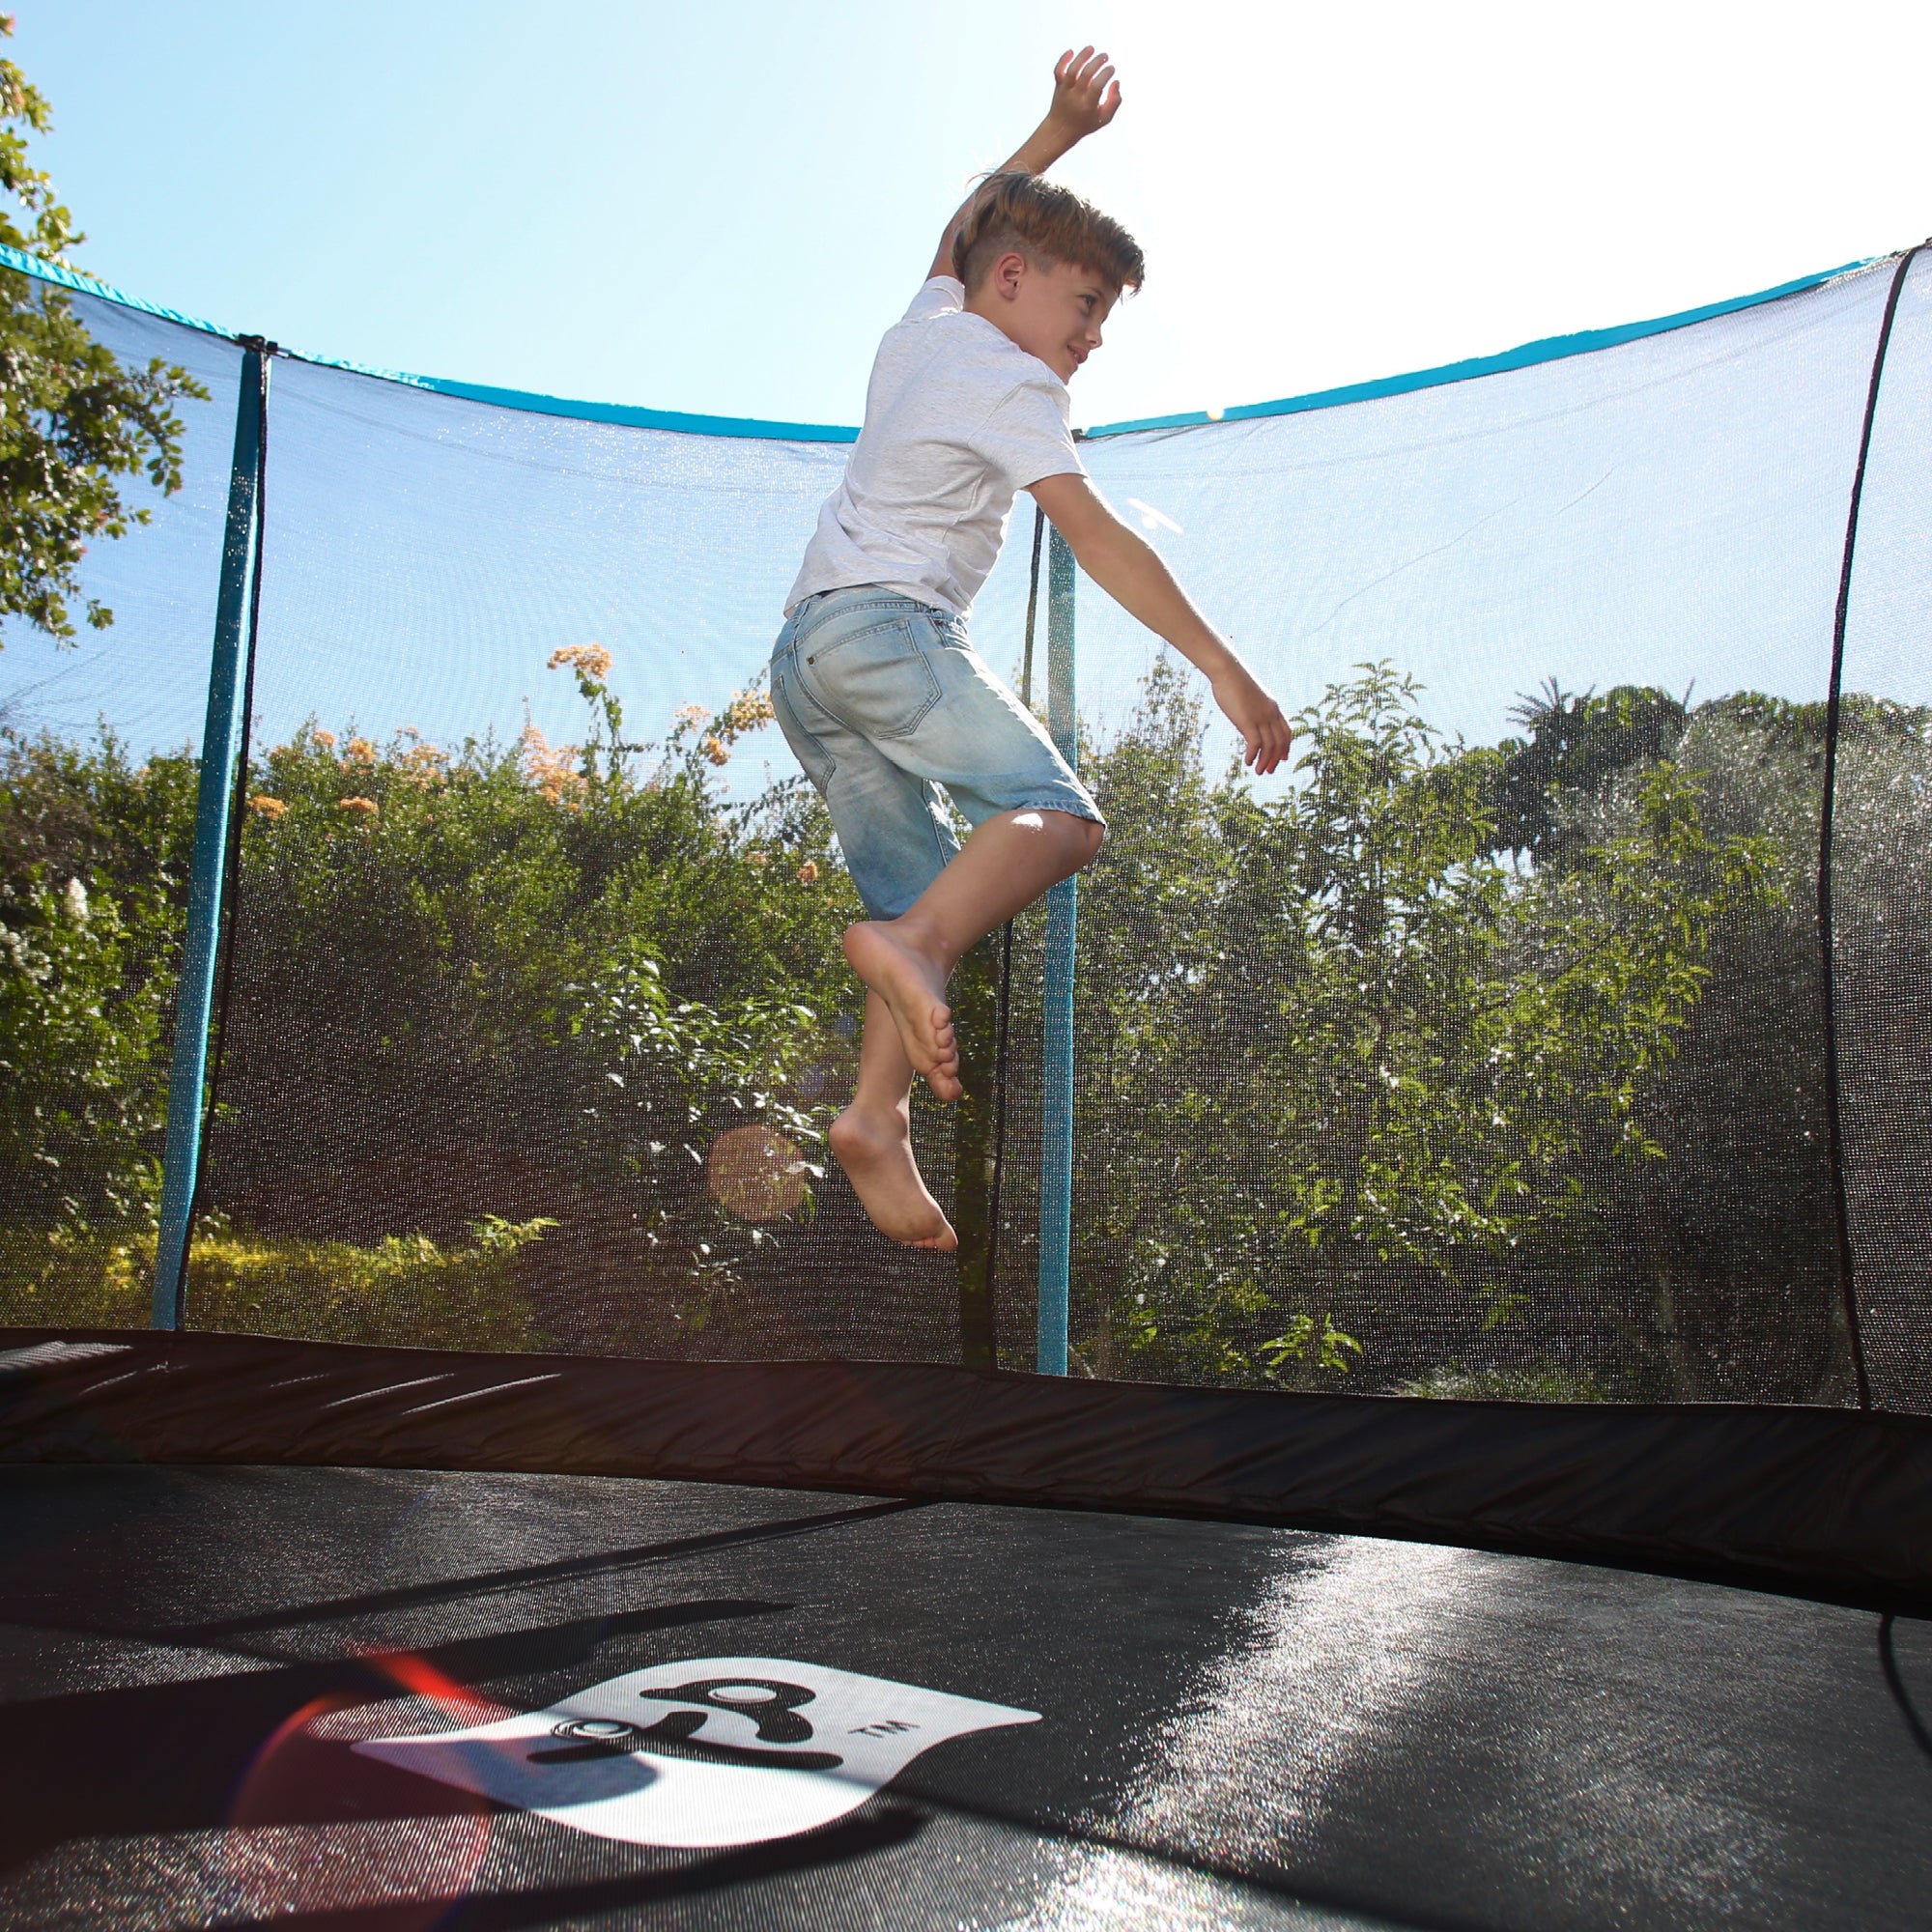  What Should You Know Before Buying a Circular Trampoline for Your Home? 